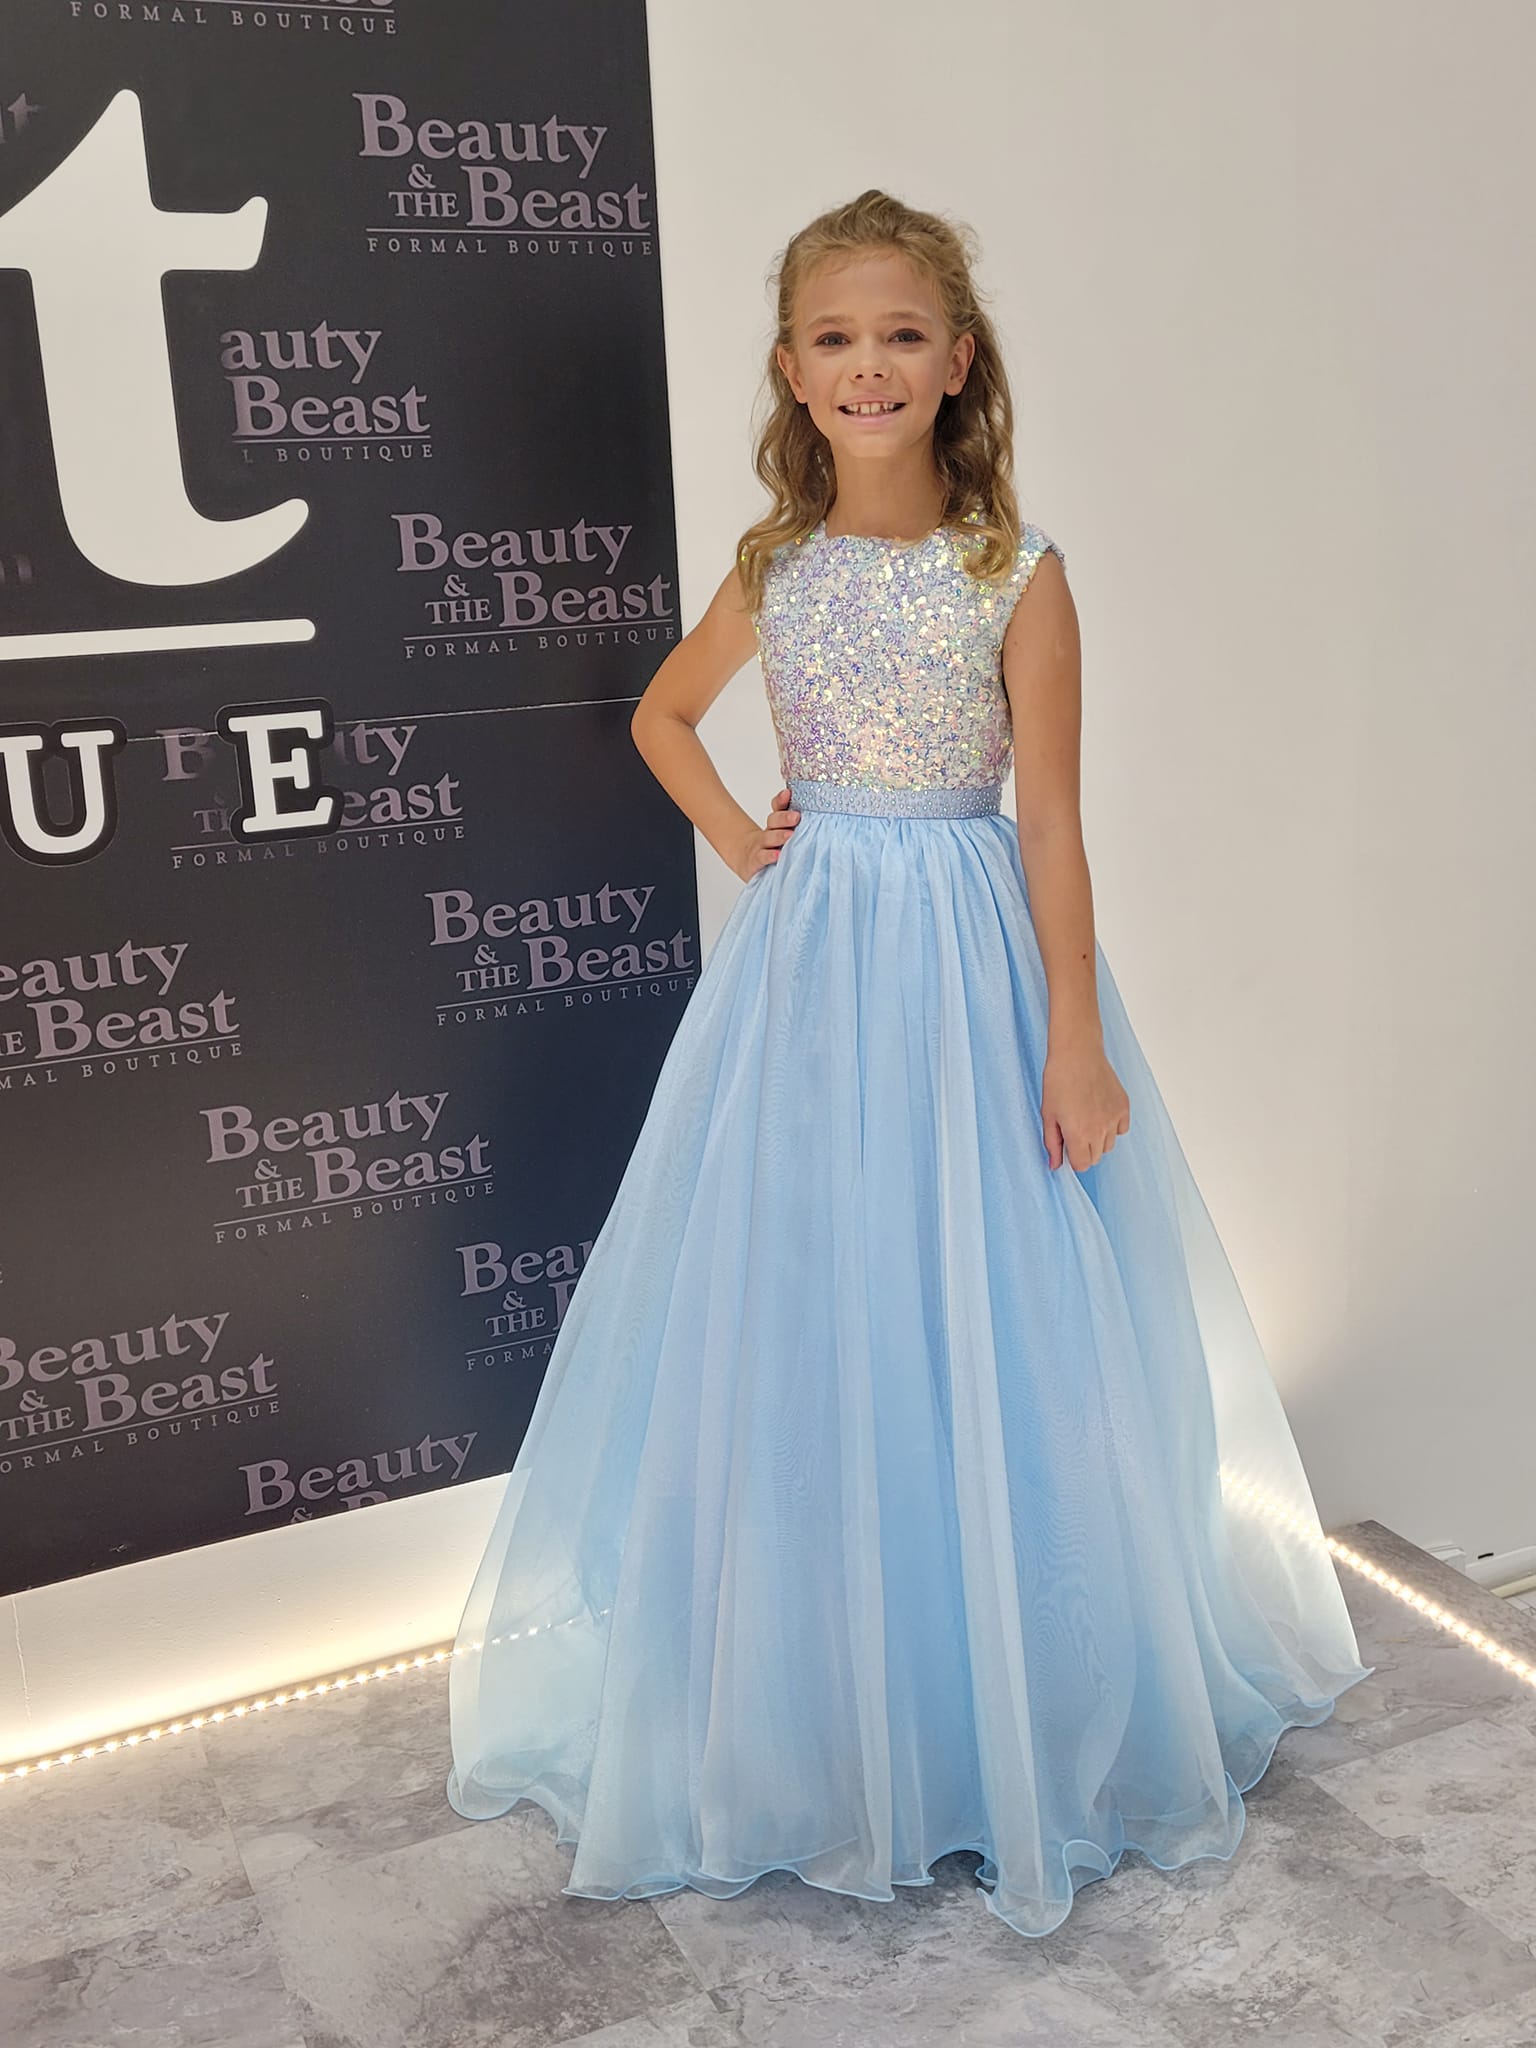 Sky-Blue Girls Pageant Dress 2023 Long A Line Sequin Organza Kids Birthday Formal Party Gown Infant Toddler Teens Preteen Baby Tiny Young Junior Miss Children Lilac